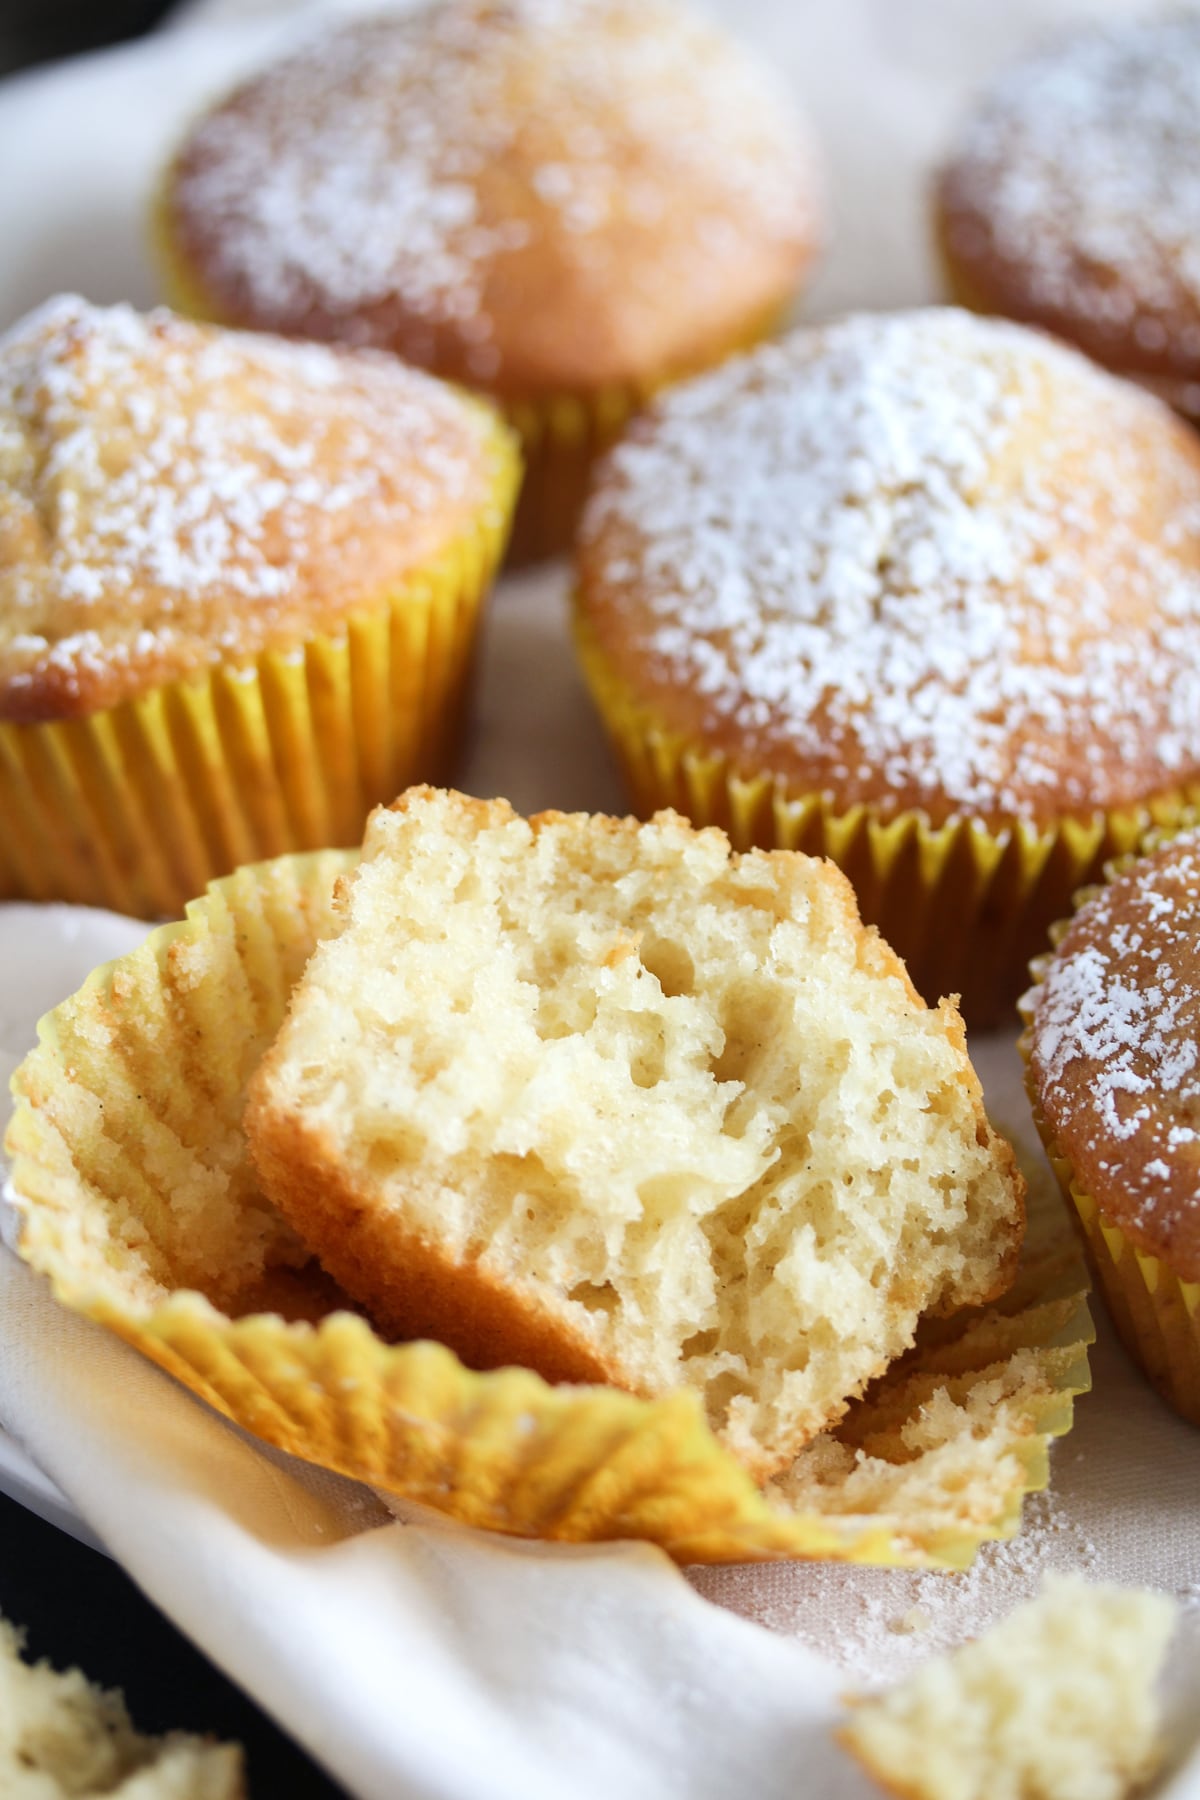 several muffins, one of them split to show the crumb.